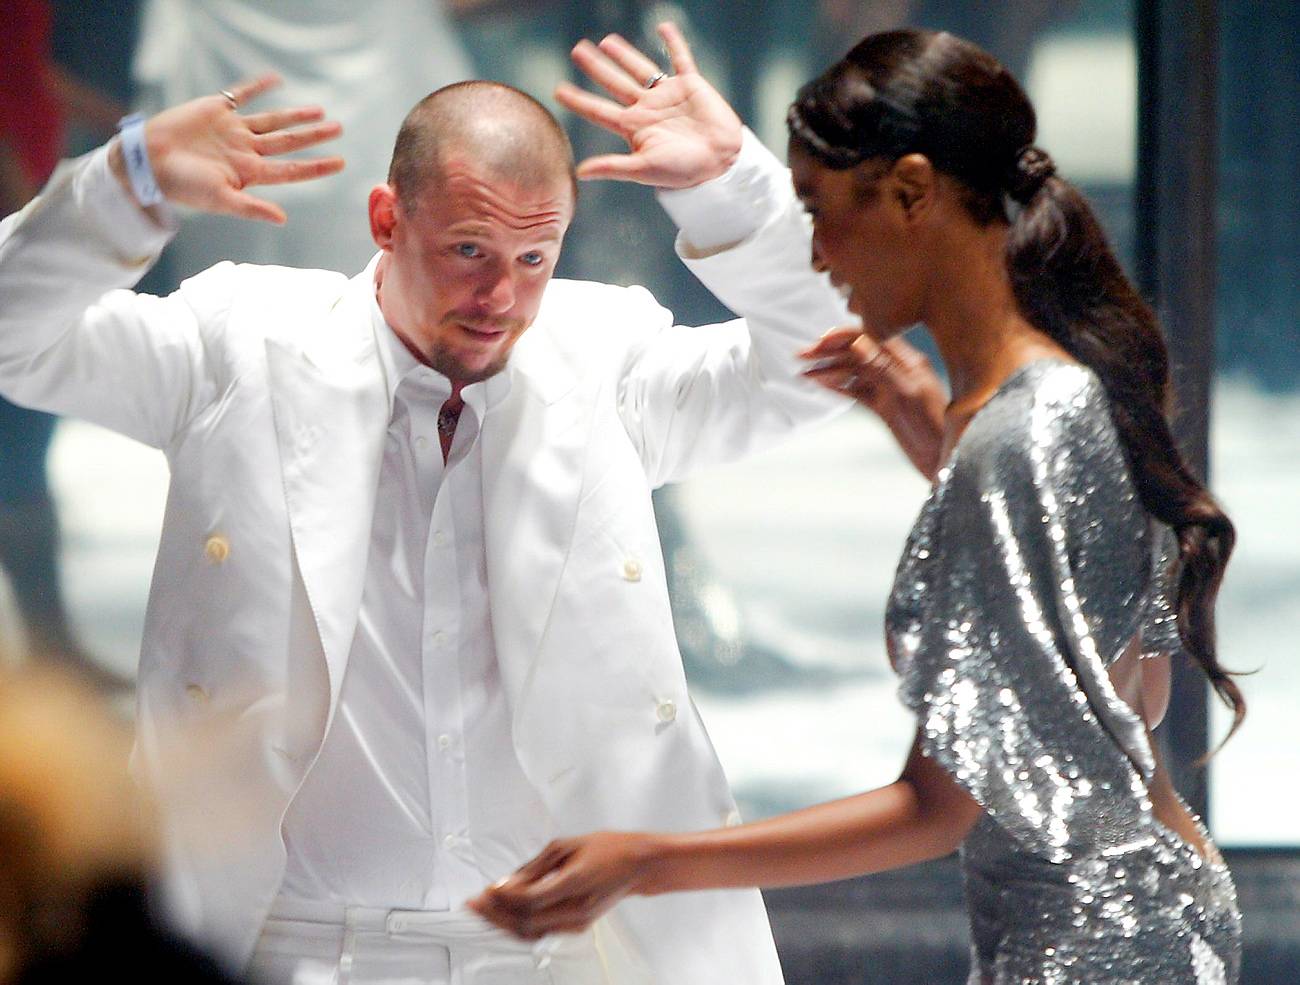 Alexander McQueen killed himself while high on cocaine due to